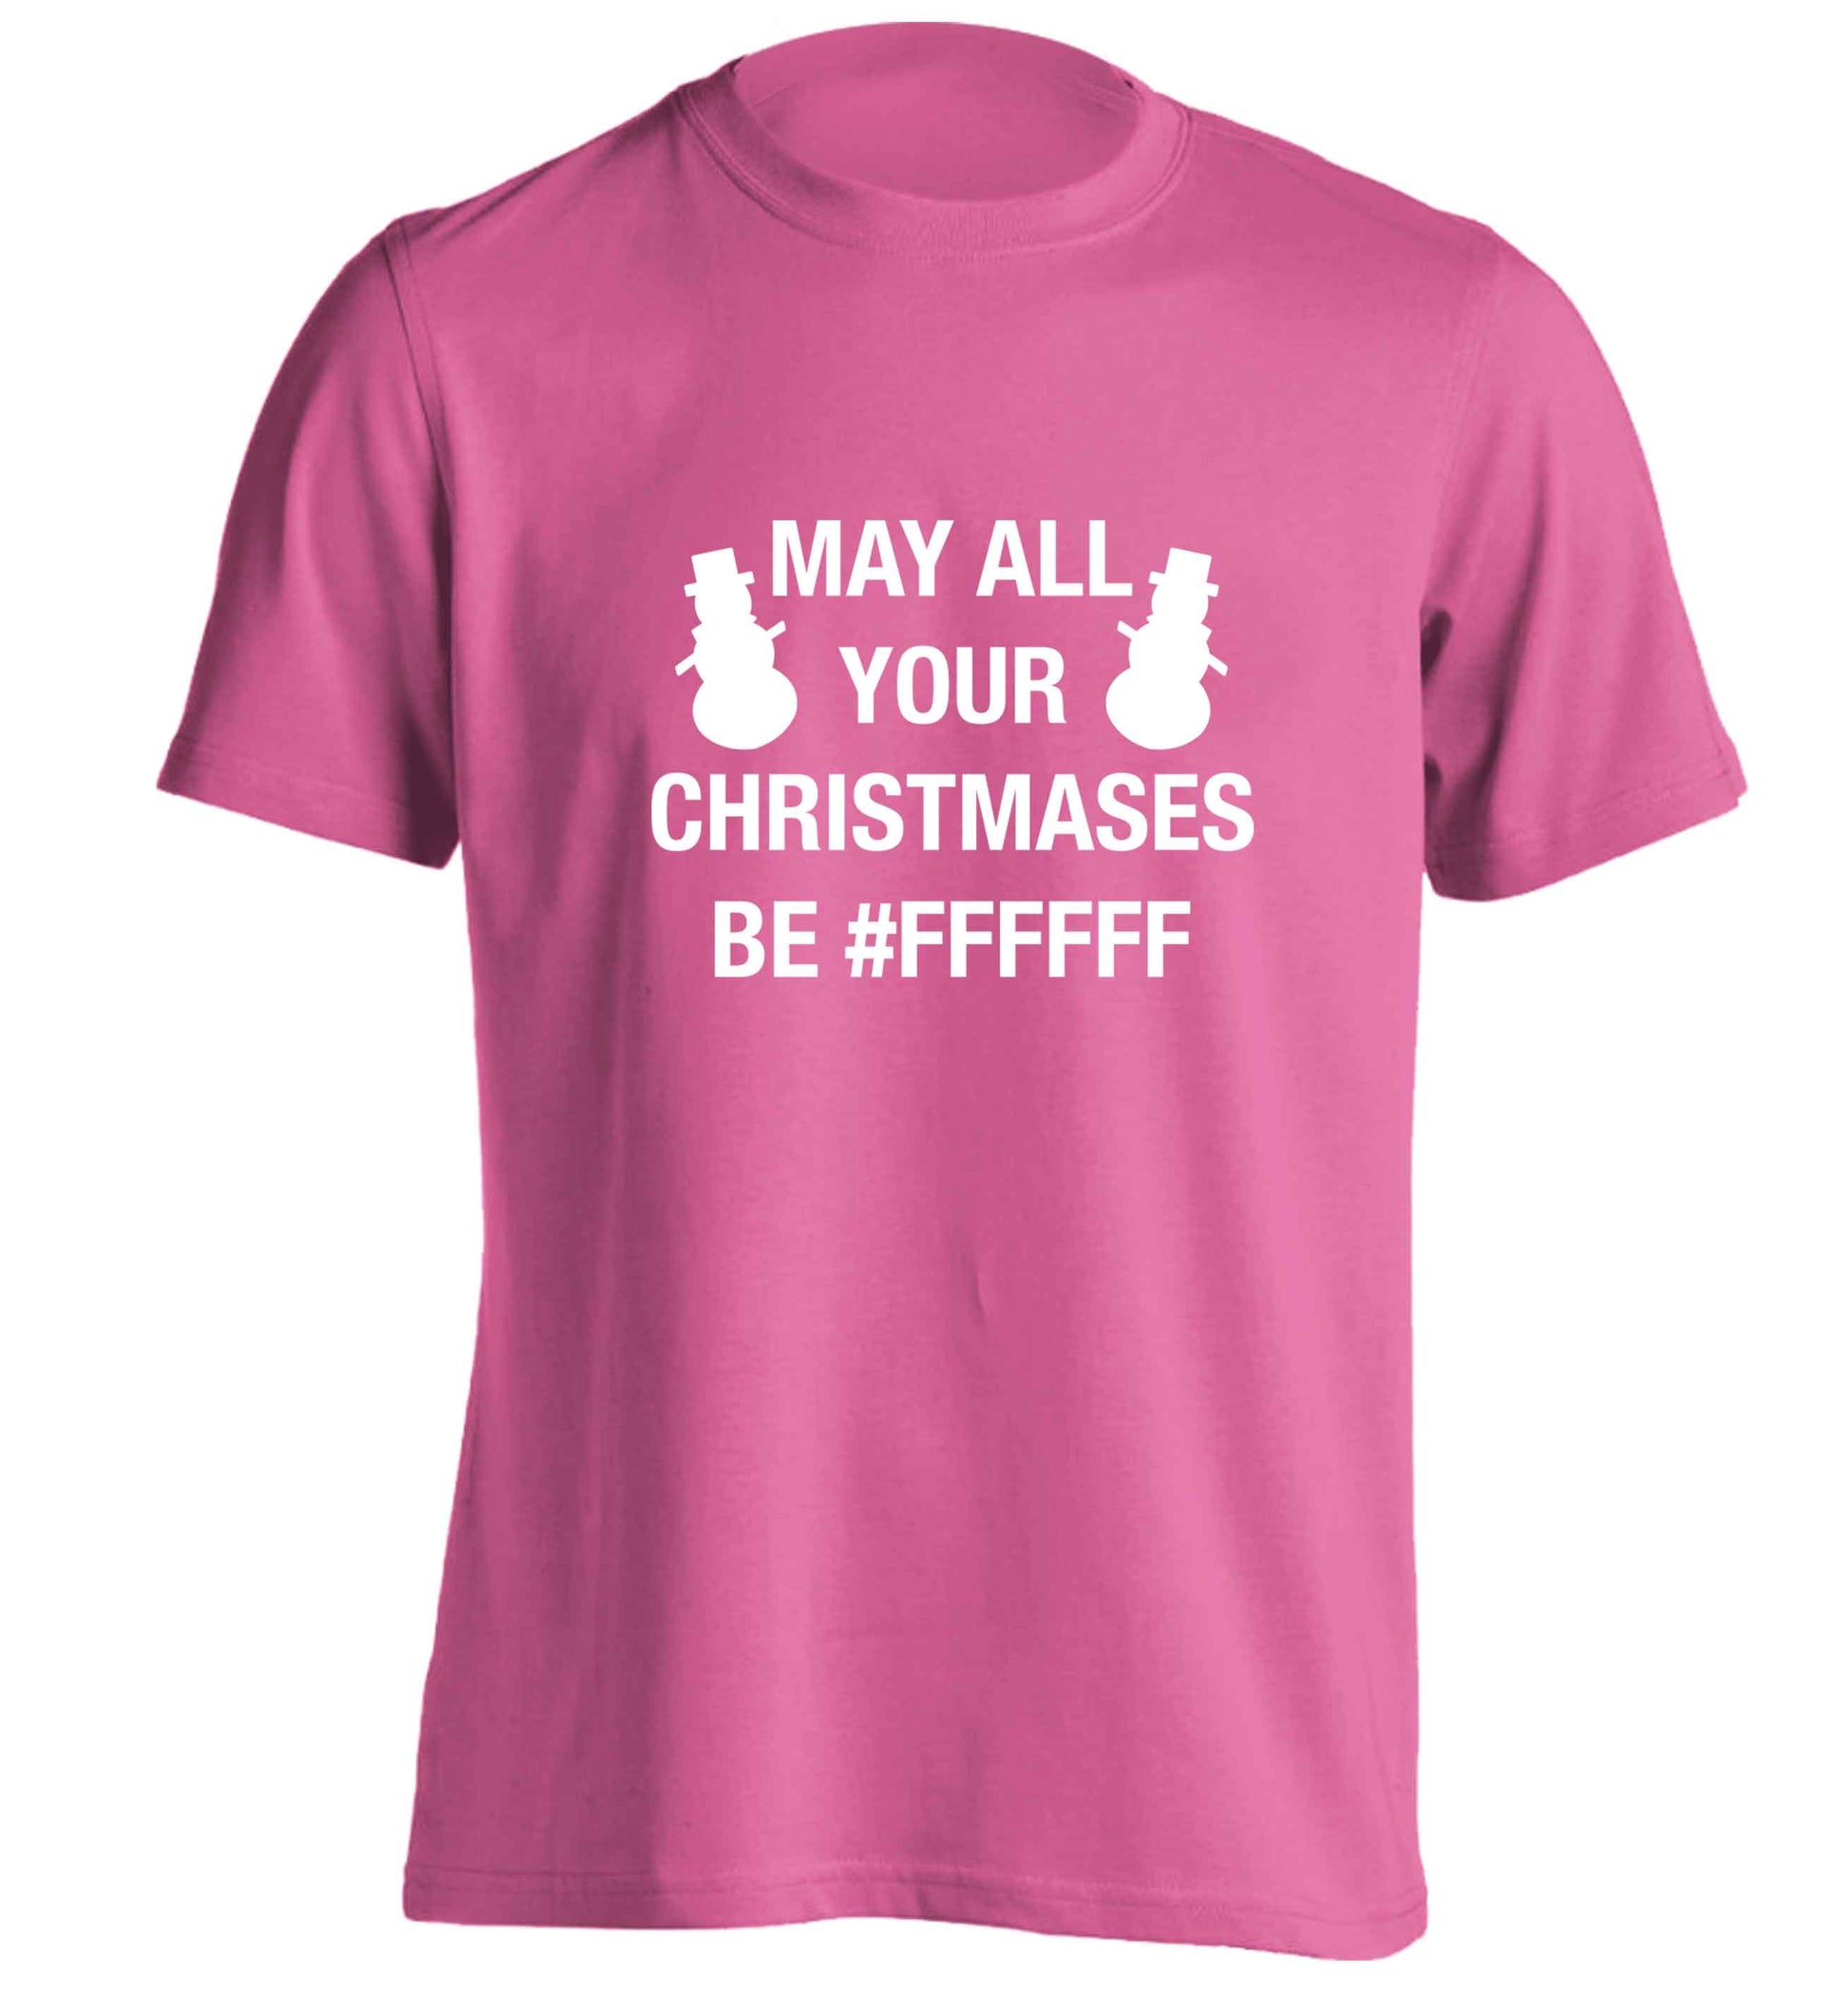 May all your Christmases be #FFFFFF adults unisex pink Tshirt 2XL